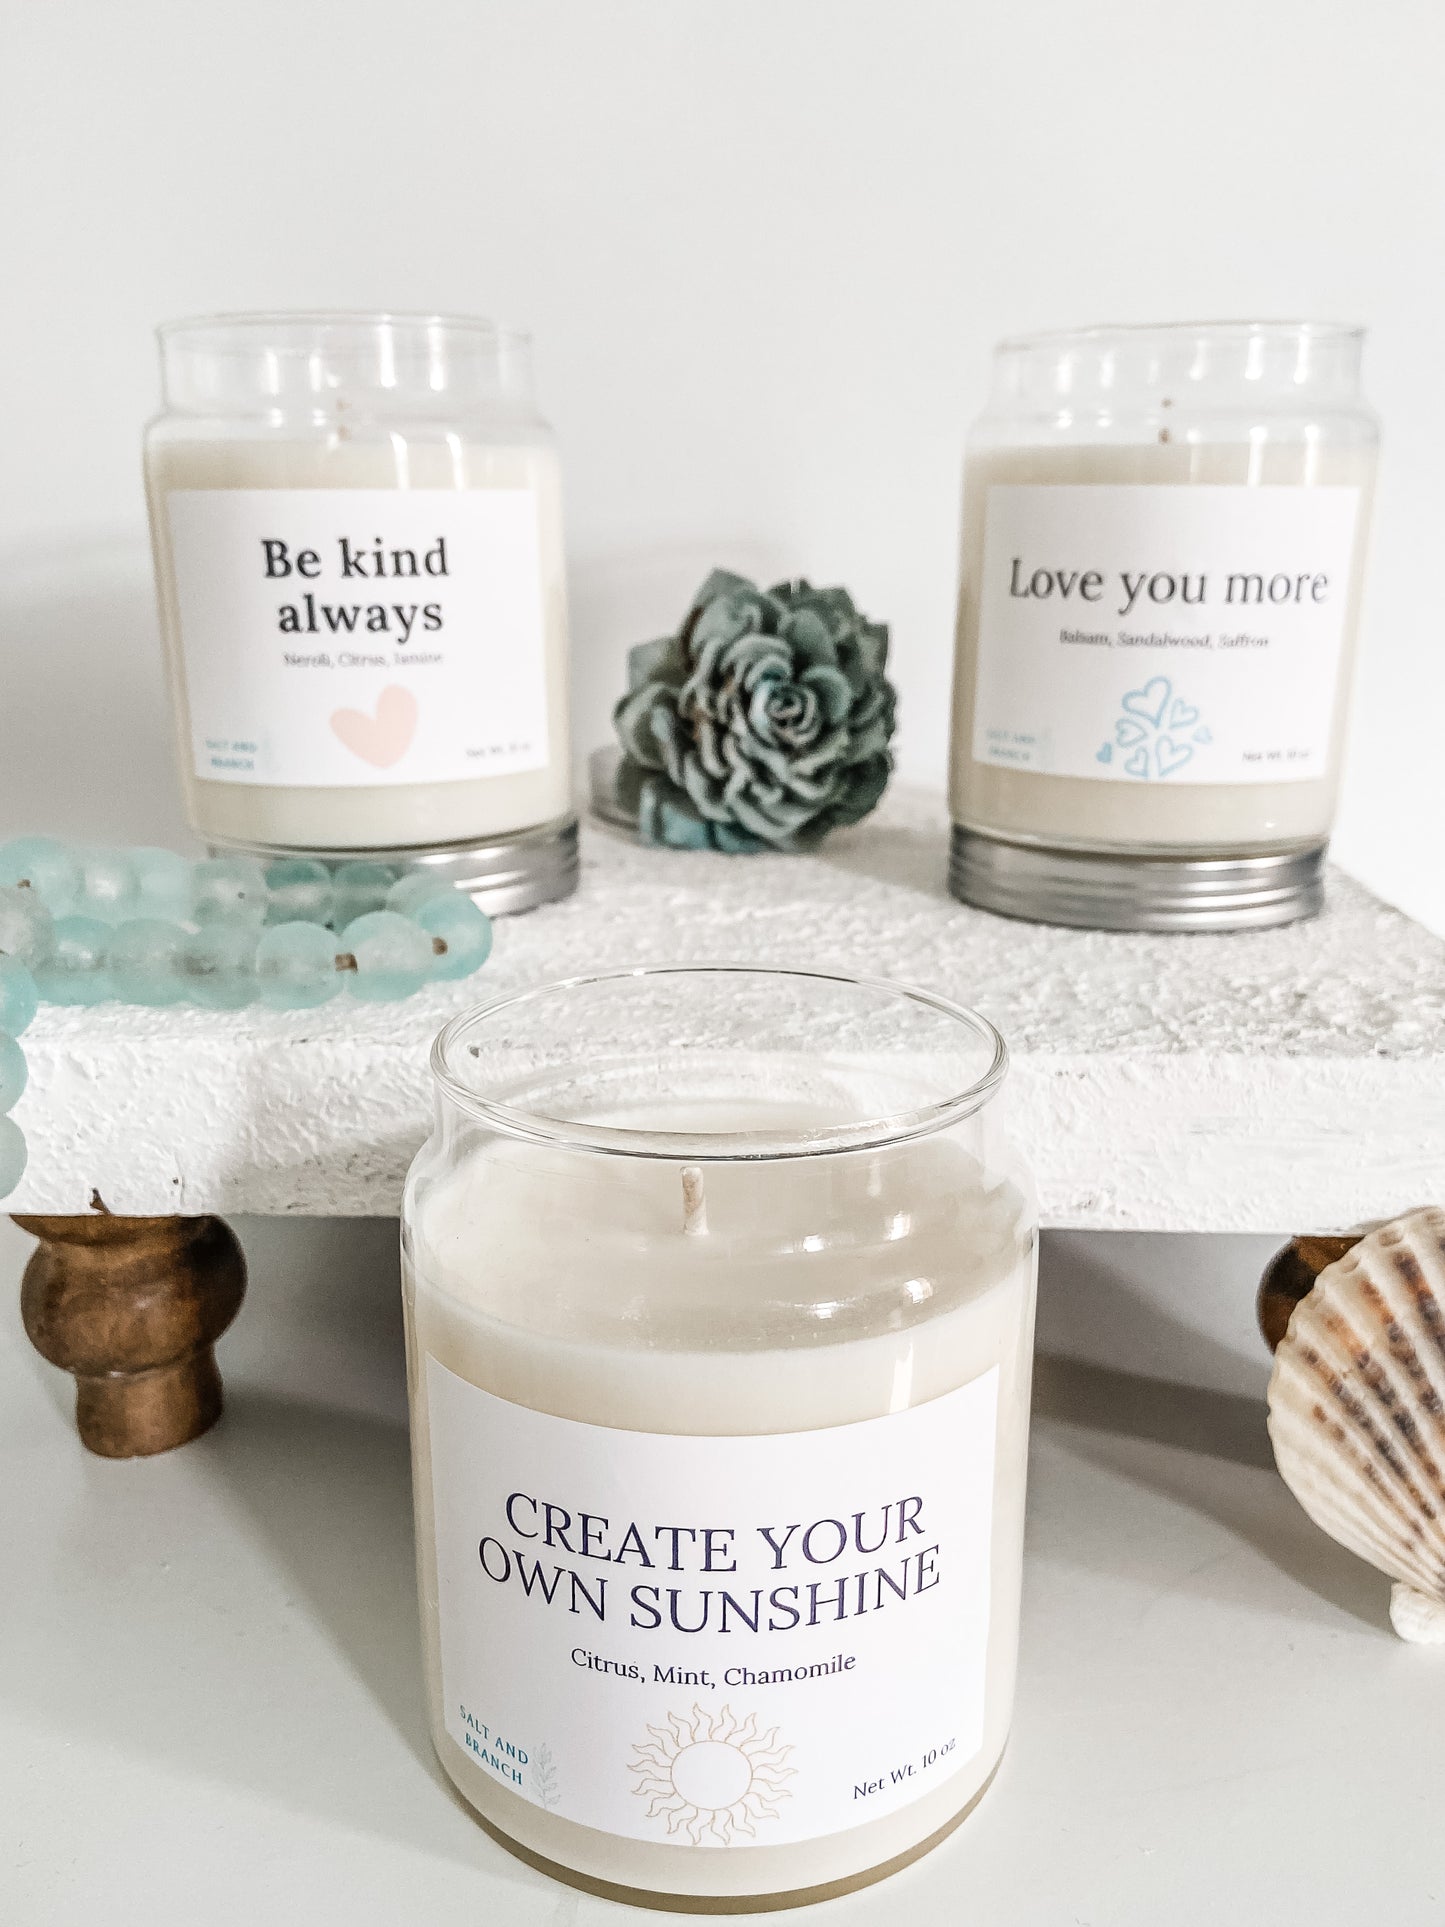 Create Your Own Sunshine Soy Candle - Salt and Branch